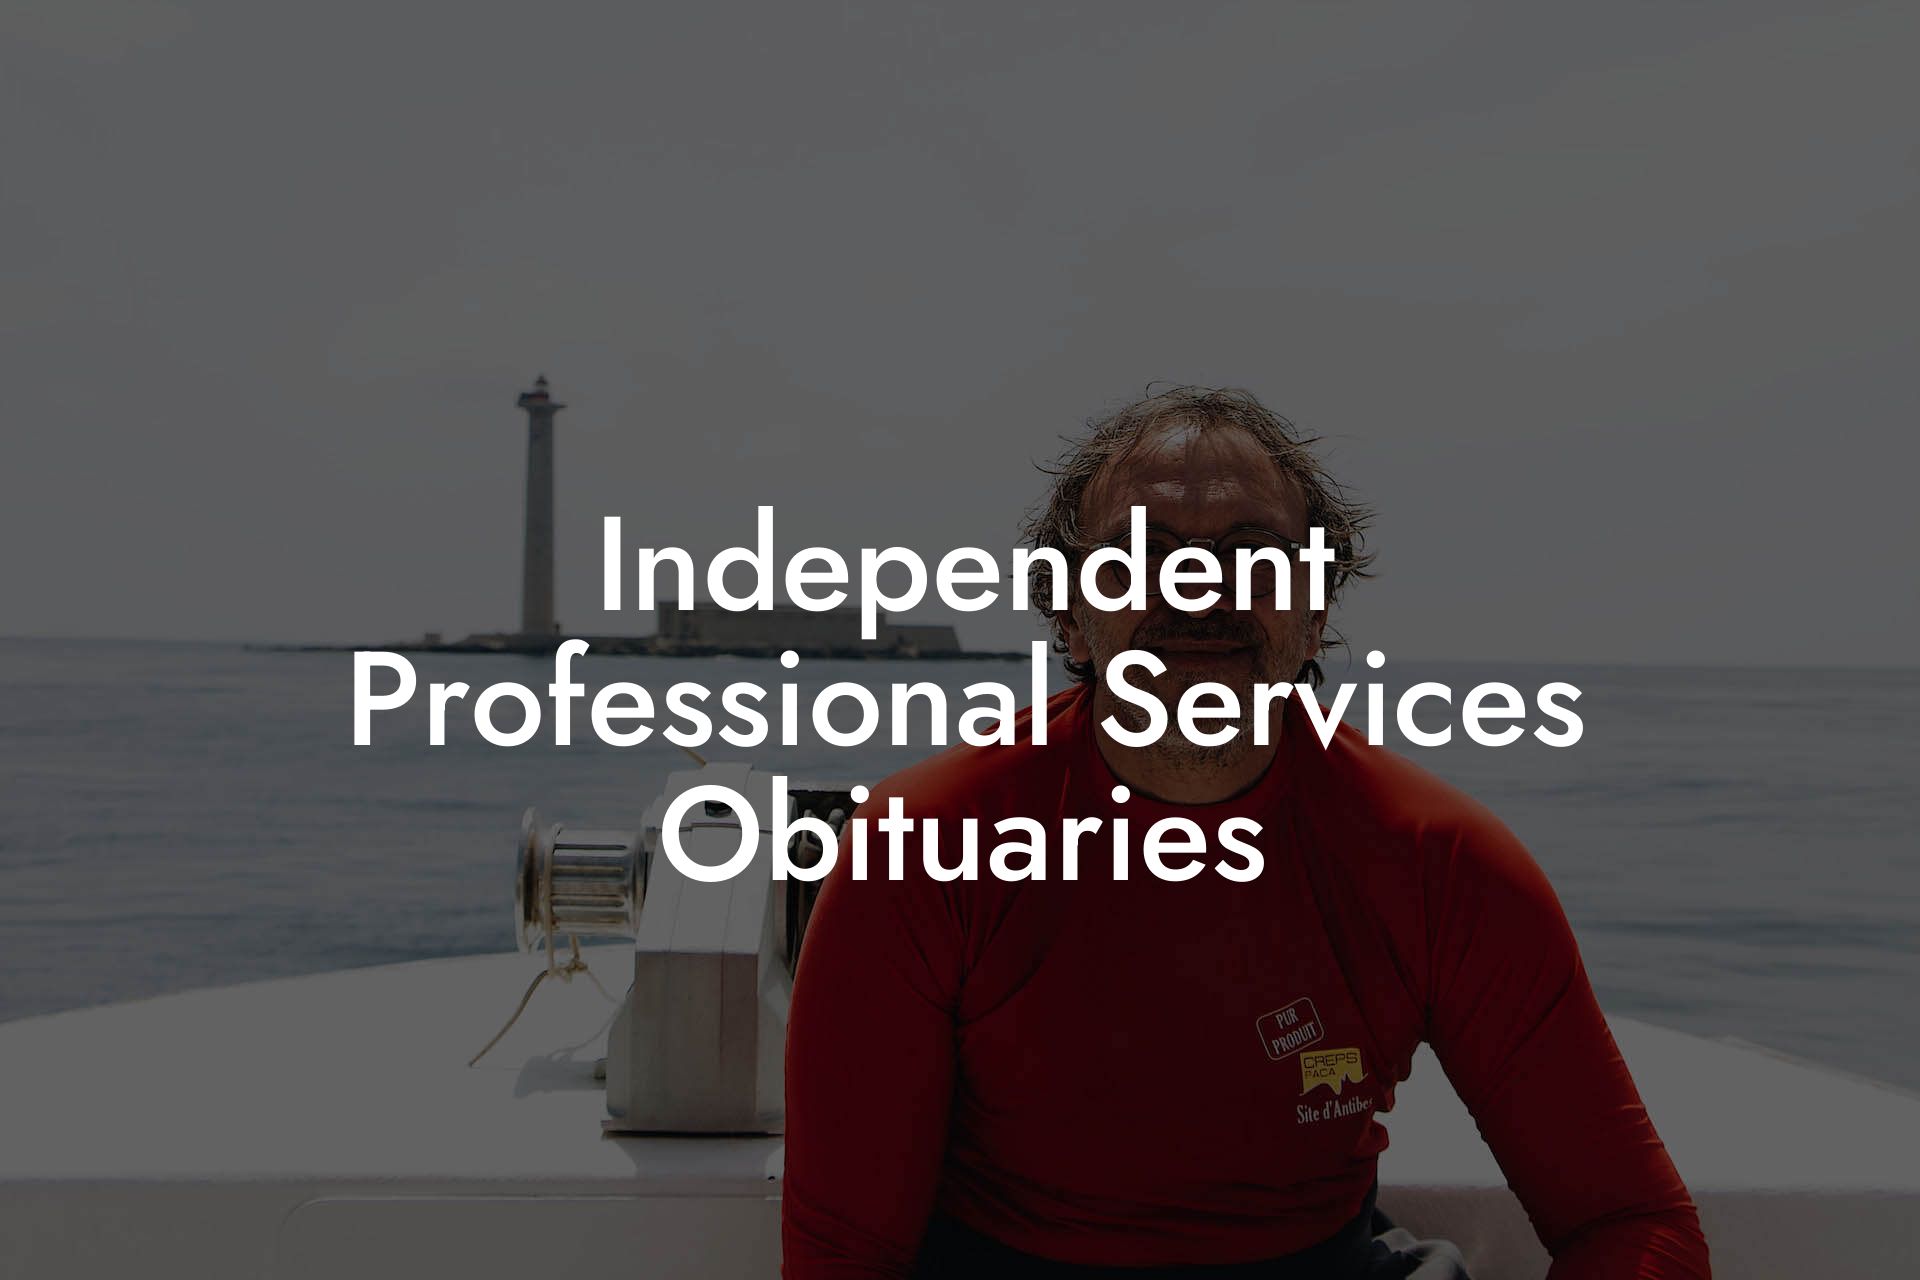 Independent Professional Services Obituaries